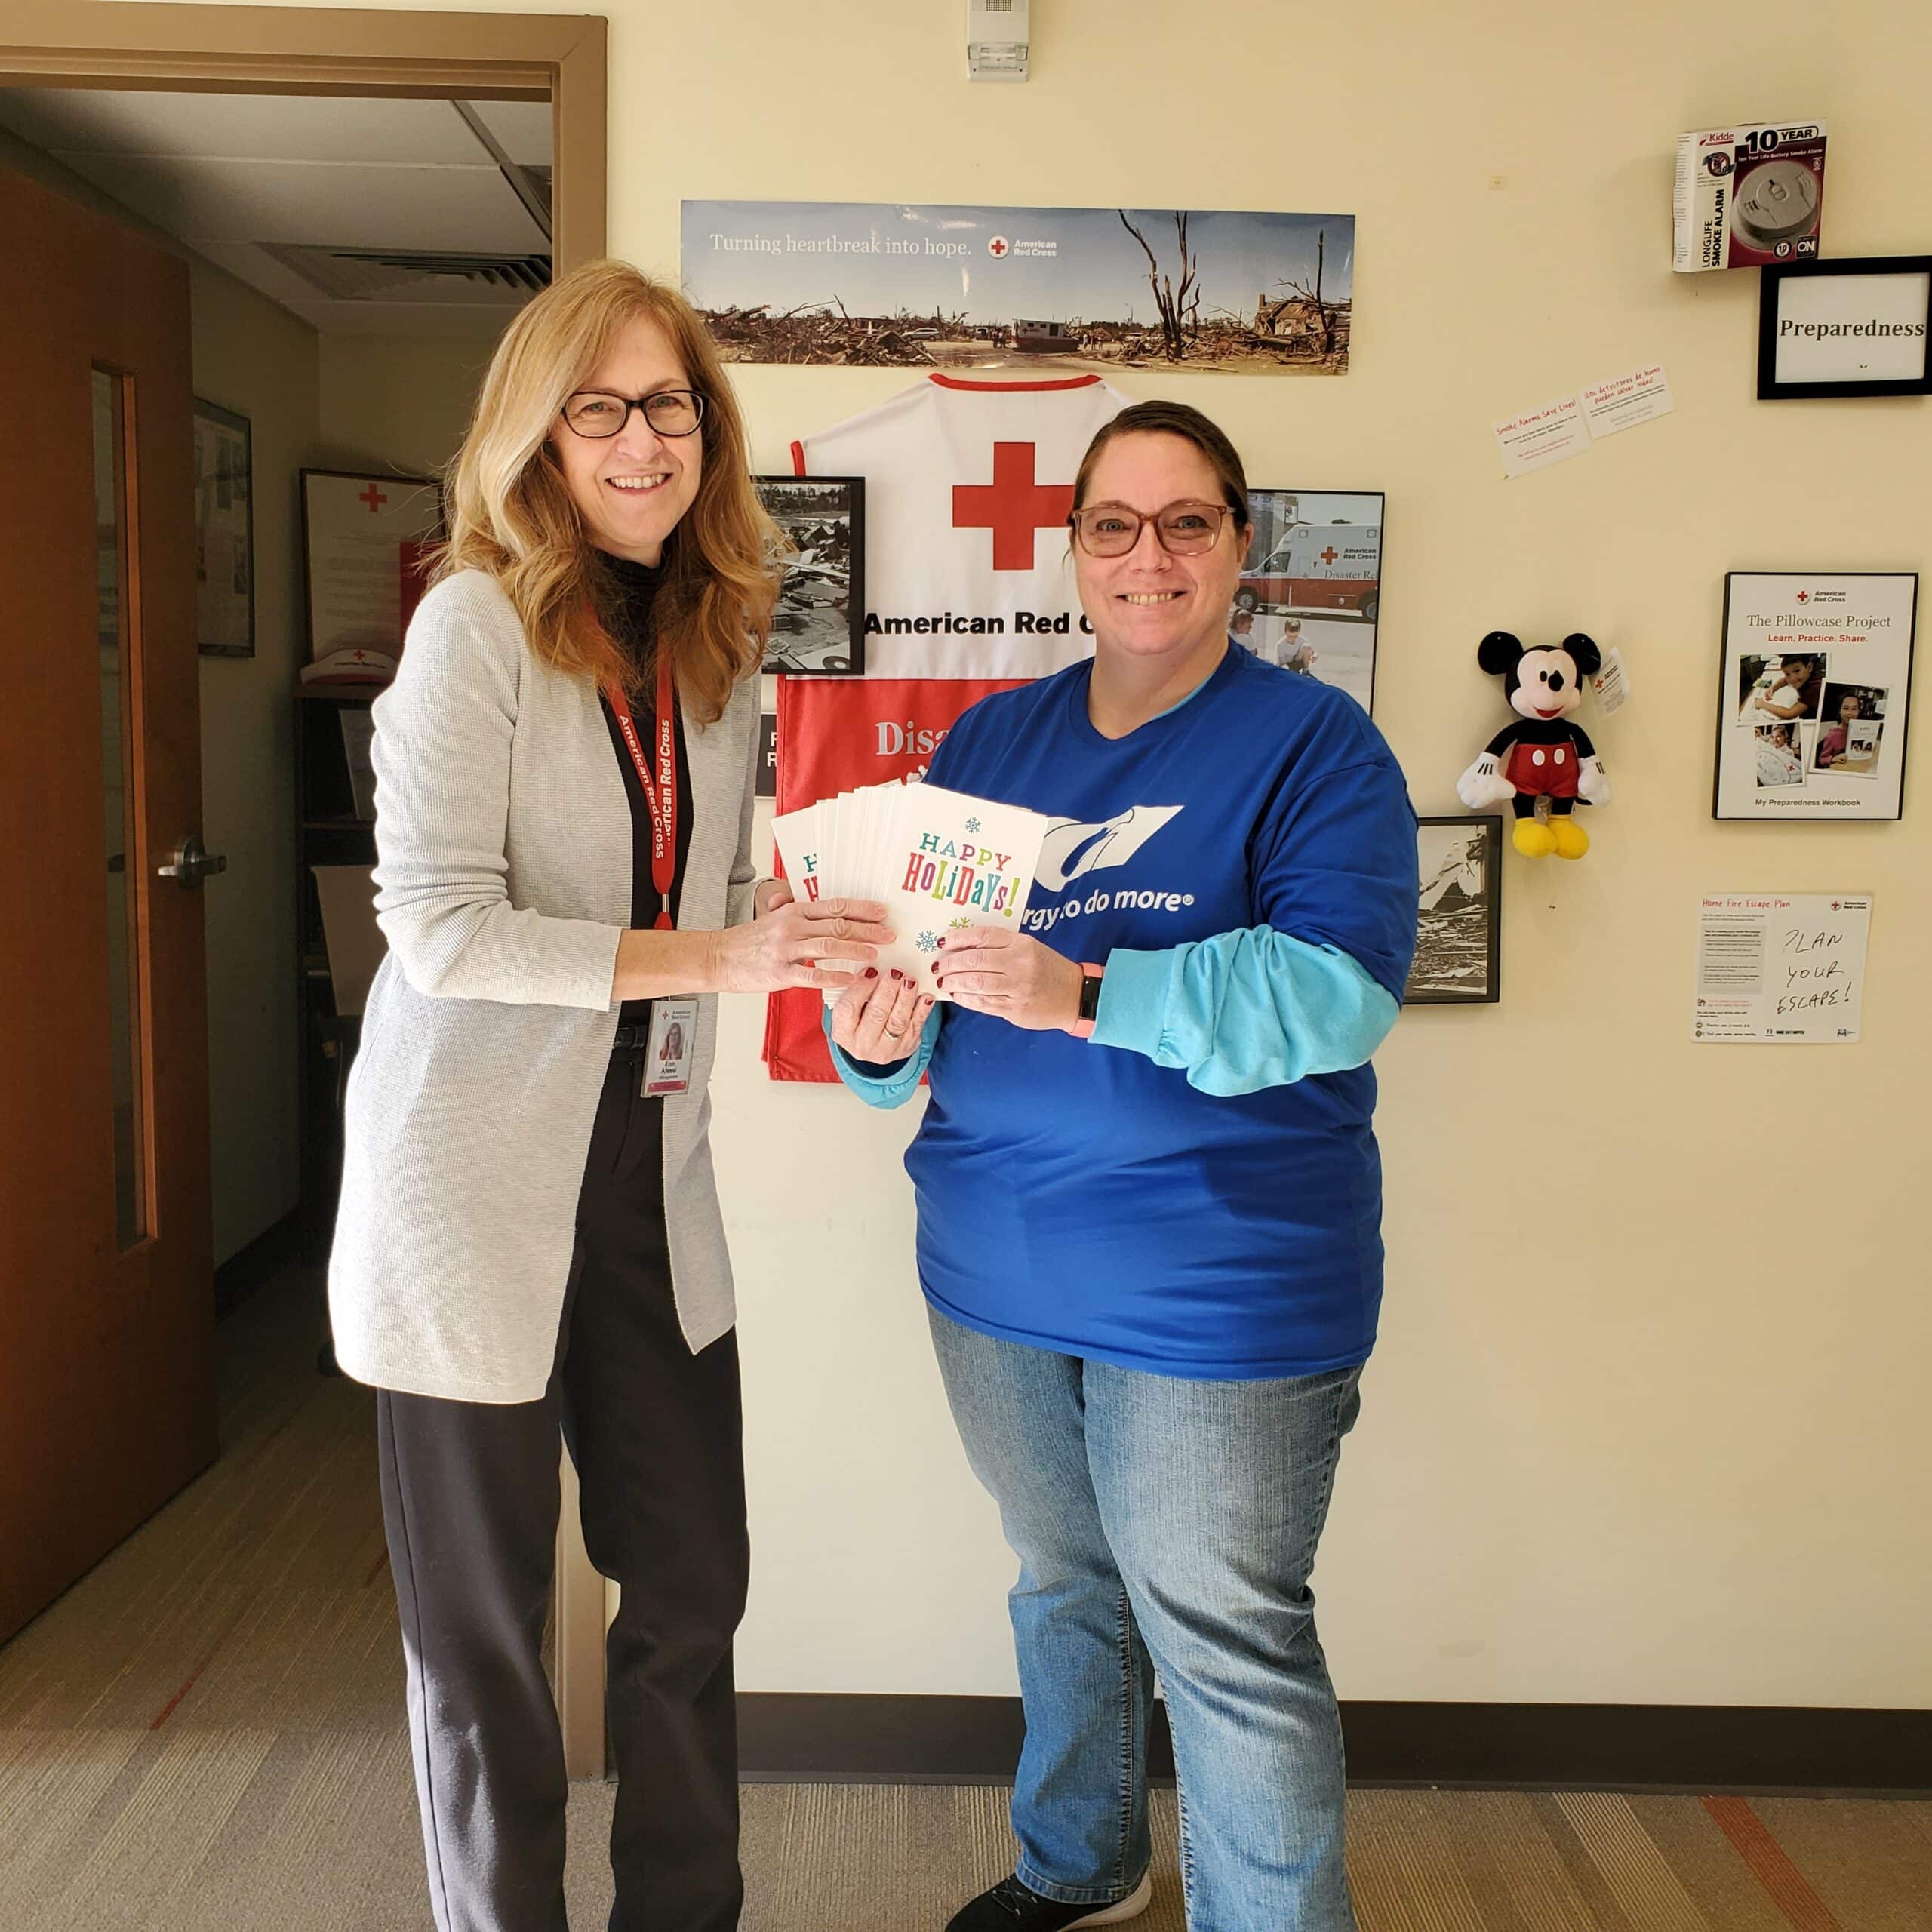 UGI employee hands holiday cards to American Red Cross employee.